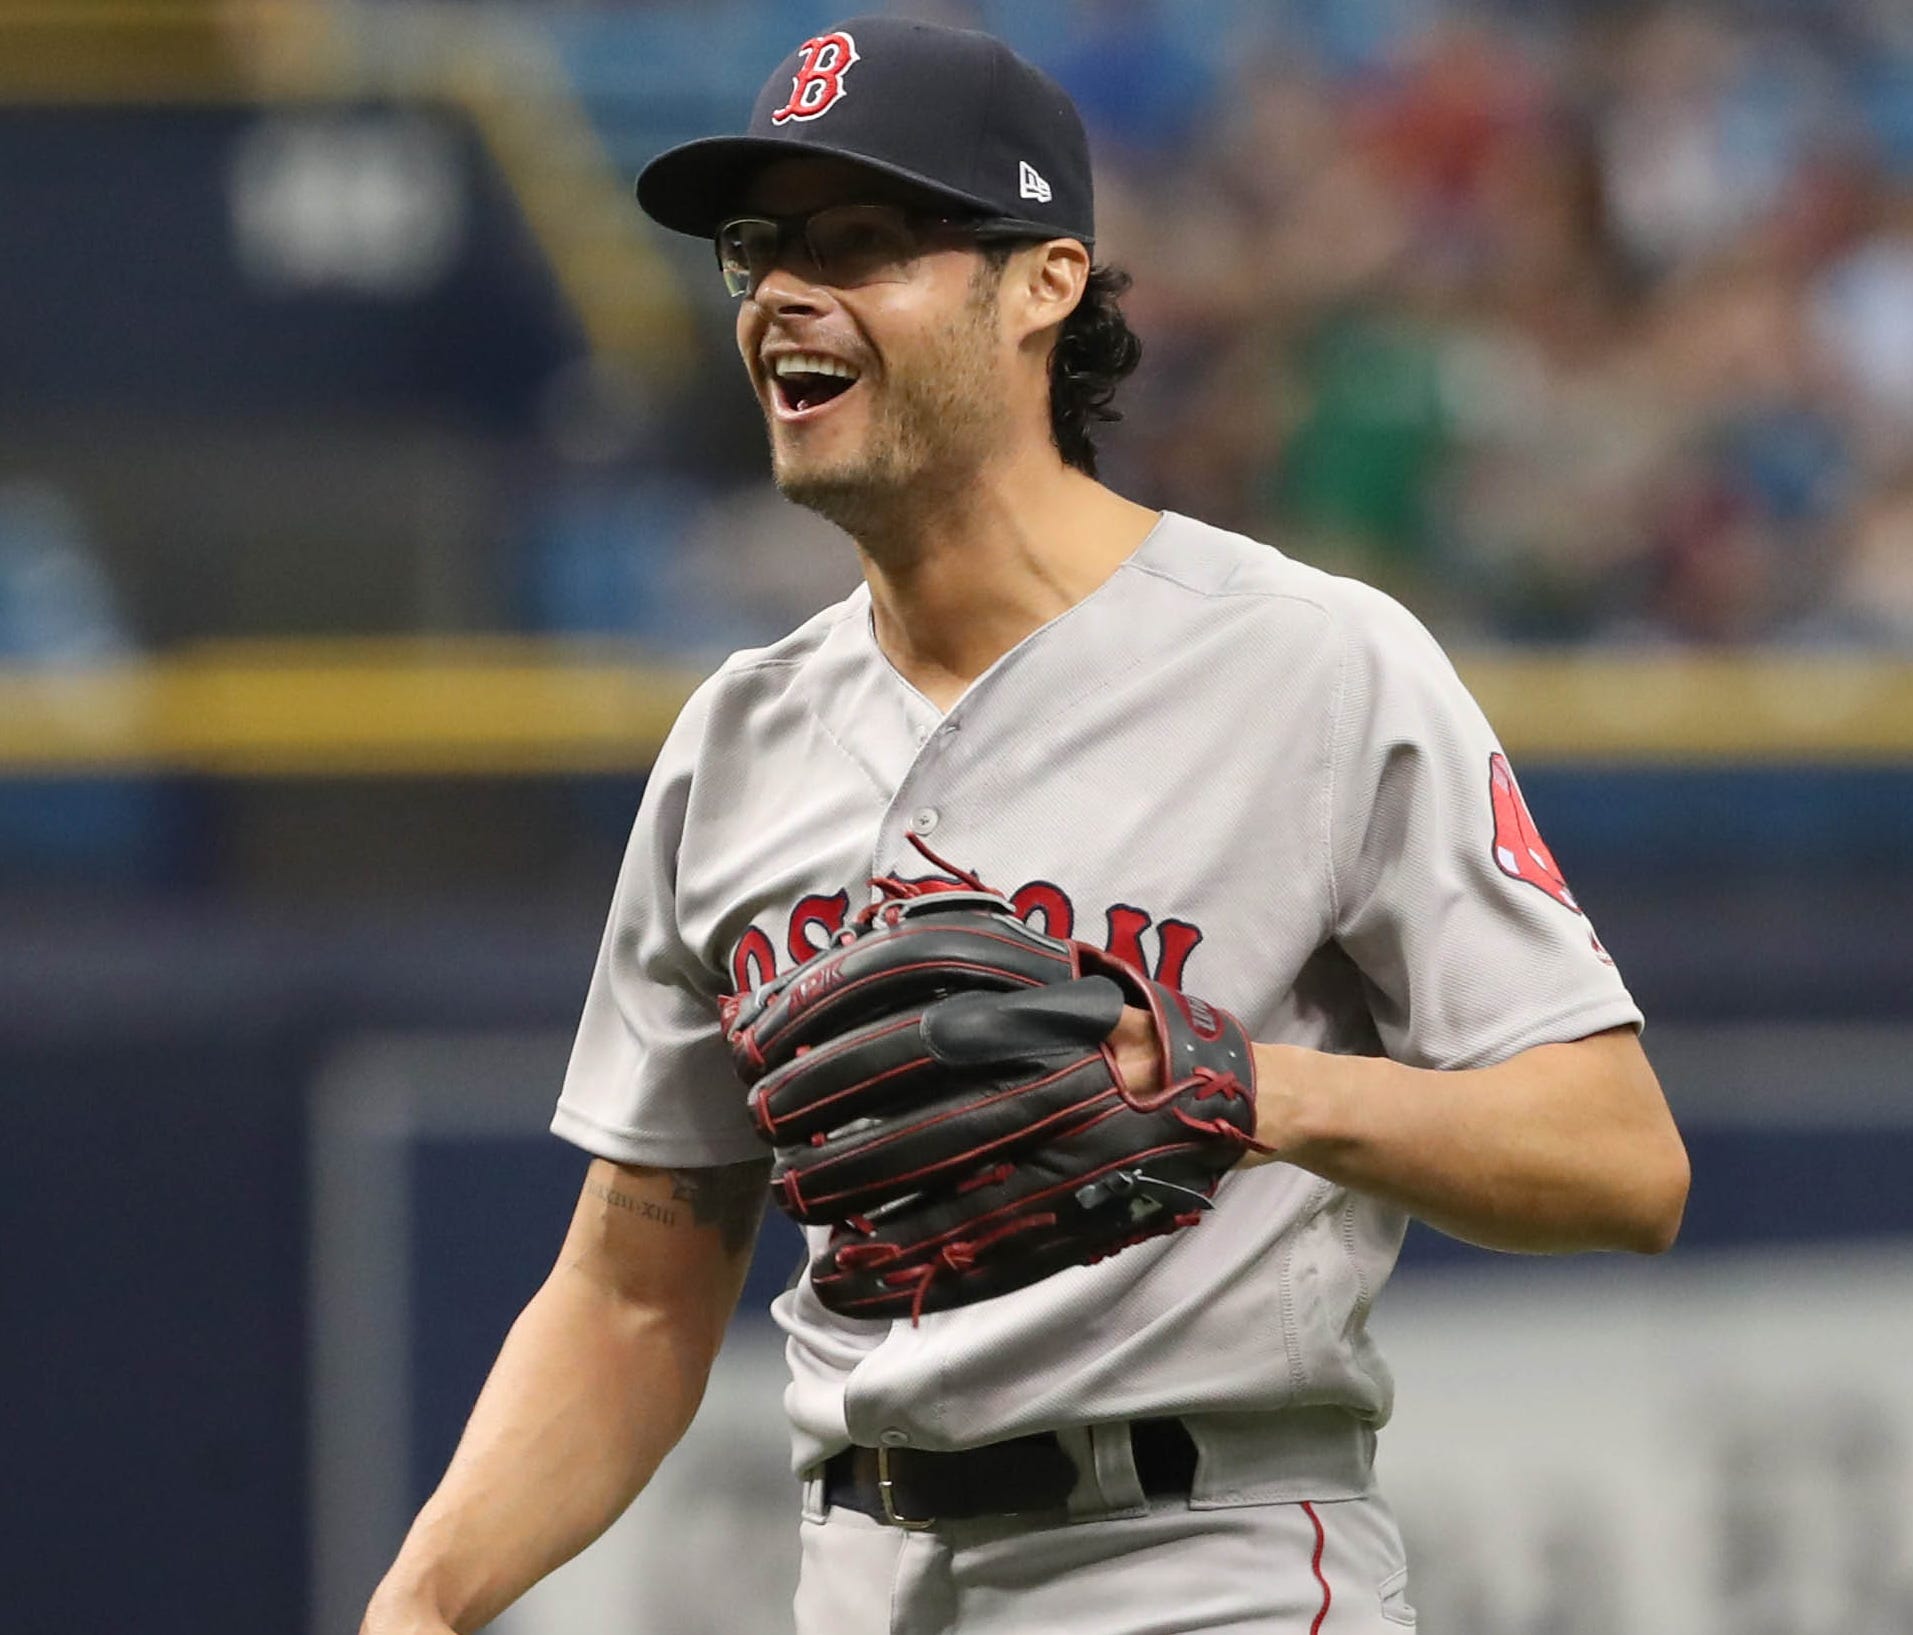 Apr 1, 2018; St. Petersburg, FL, USA; Boston Red Sox relief pitcher Joe Kelly (56) celebrates after getting the last out of the ninth inning to beat the Tampa Bay Rays at Tropicana Field. Mandatory Credit: Kim Klement-USA TODAY Sports ORG XMIT: USATS